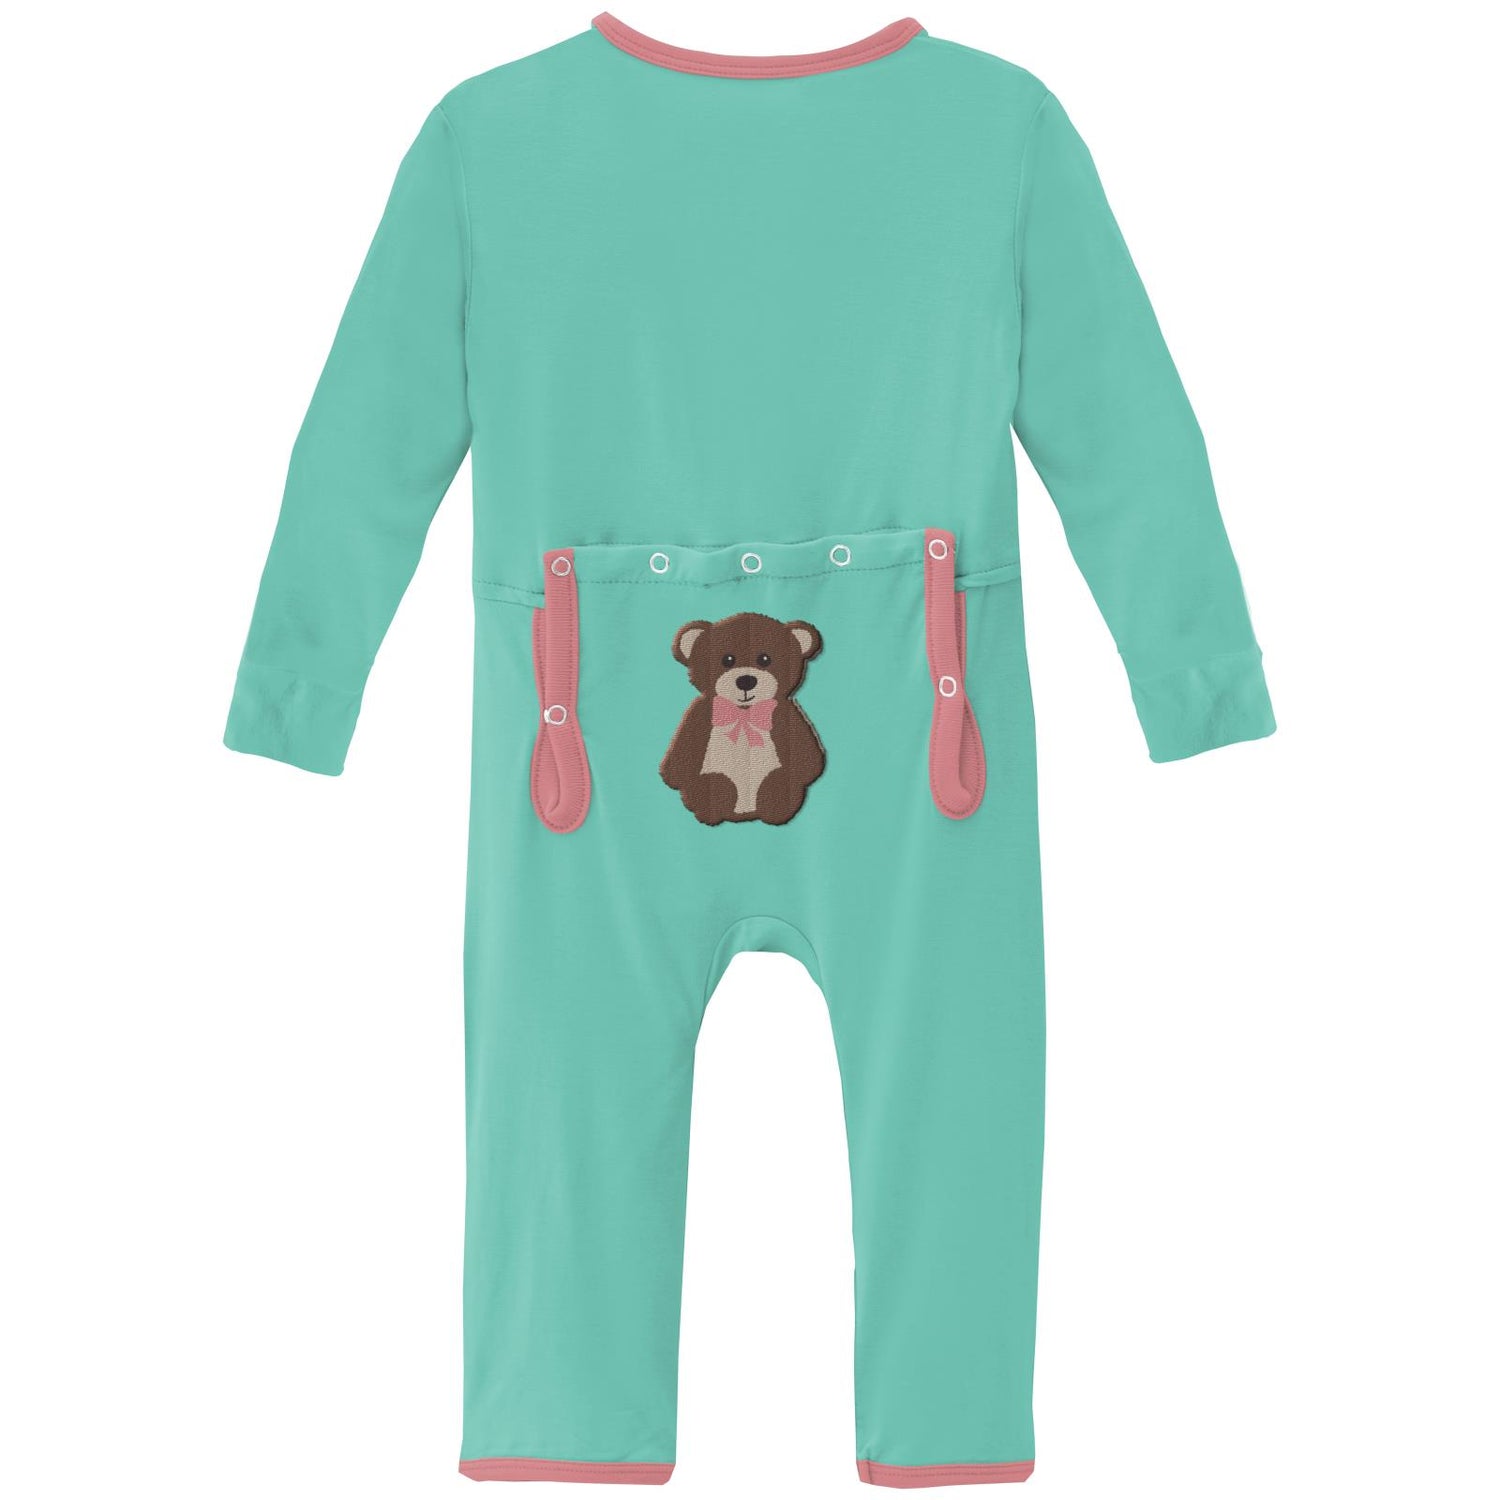 Applique Coverall with Zipper in Glass Teddy Bear